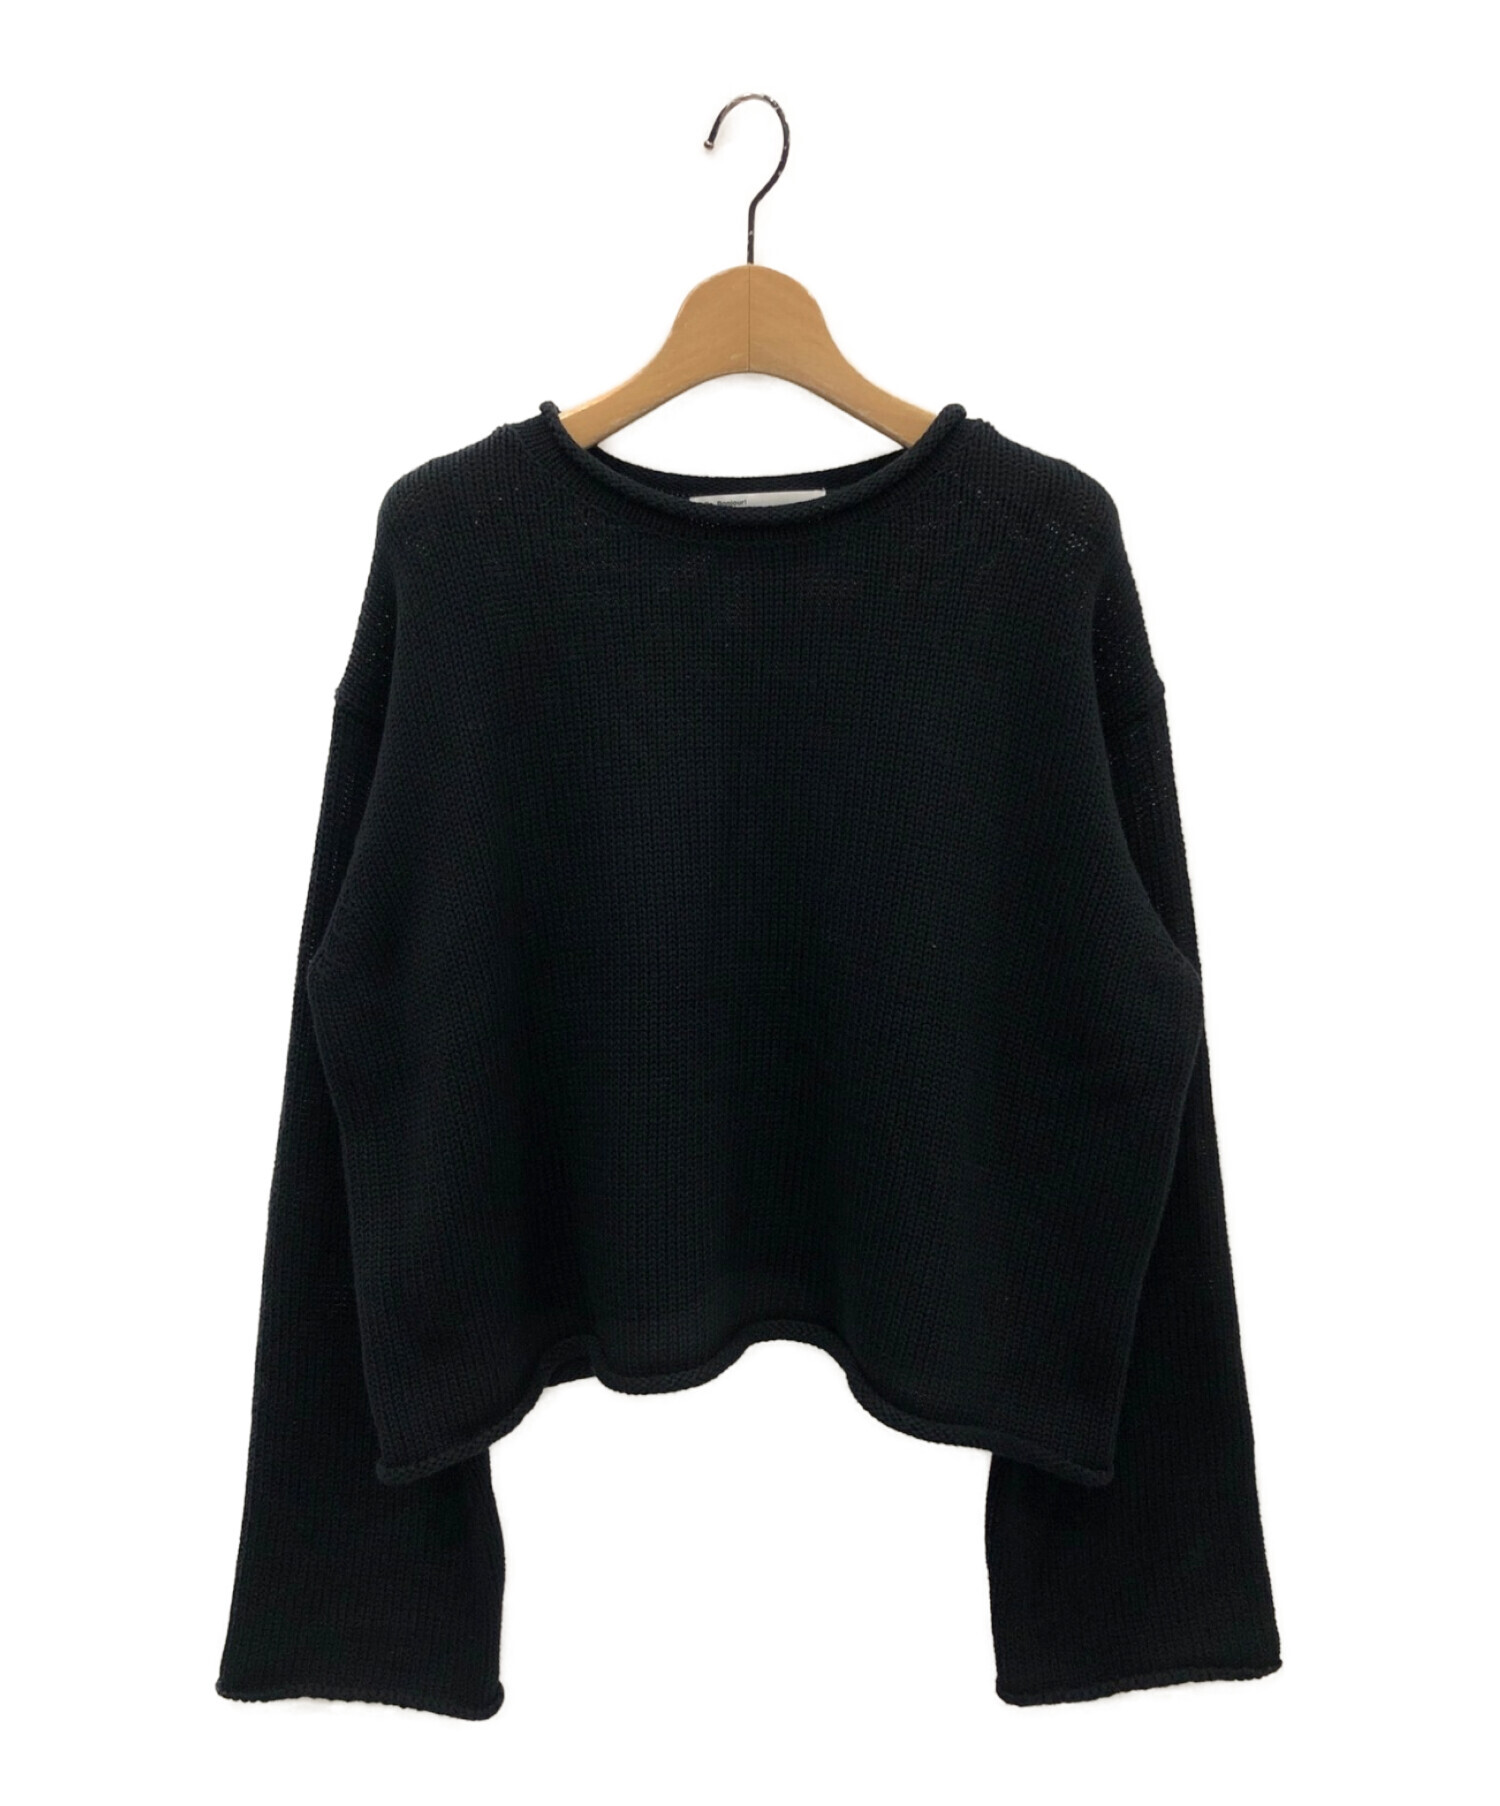 10%OFF値下タグ付L\'Appartement Rollup Knit Pullover トップス